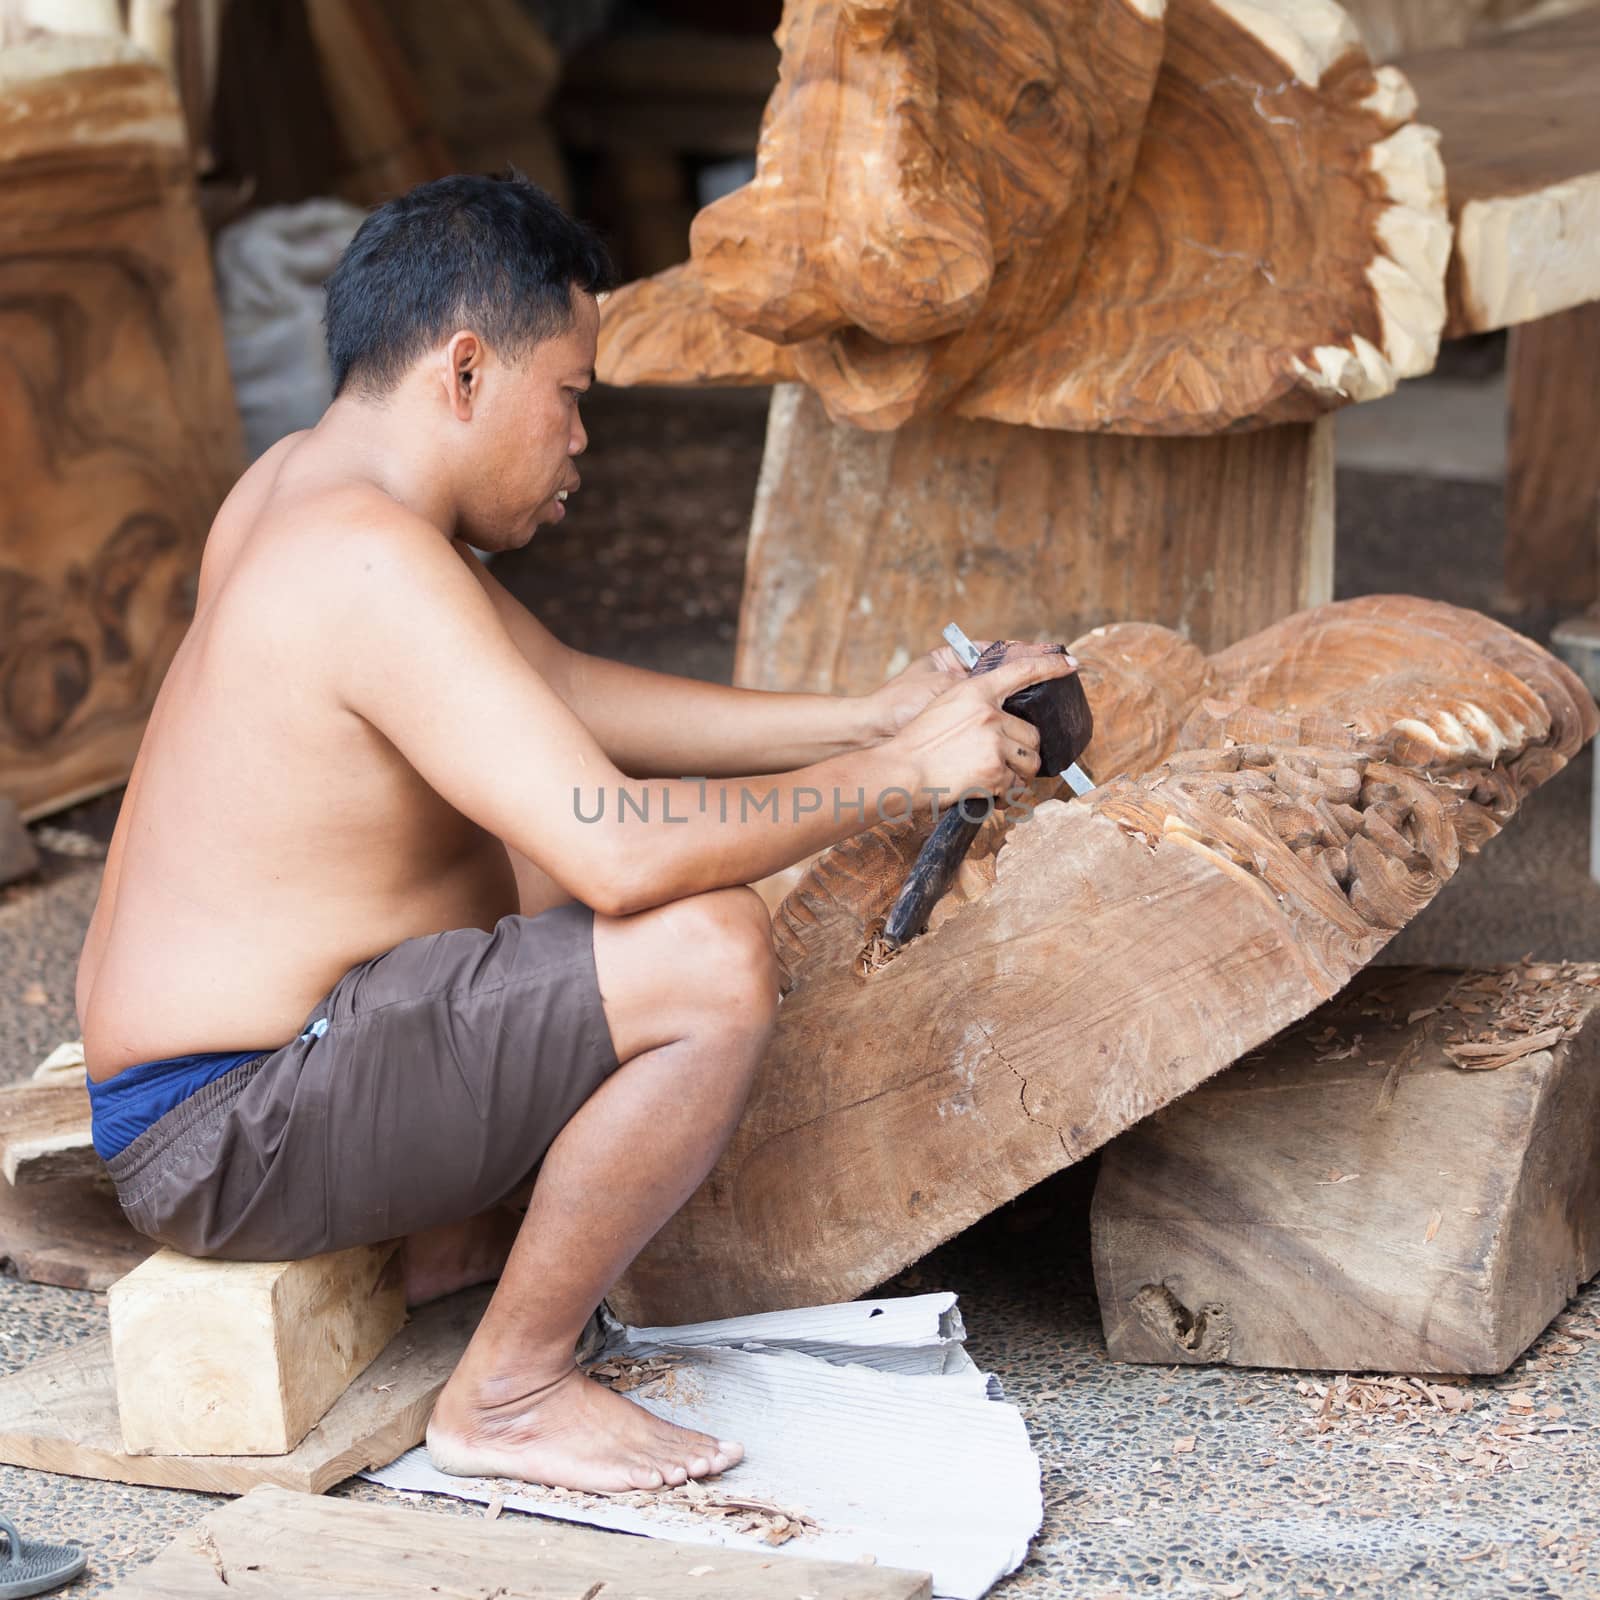 UBUD, BALI, INDONESIA - SEP 21: Balinese carver shapes wood with a chisel and hammer in workshop on Sep 21, 2012 in Ubud, Bali, Indonesia. Balinese handmade souvenirs are popular among tourists.